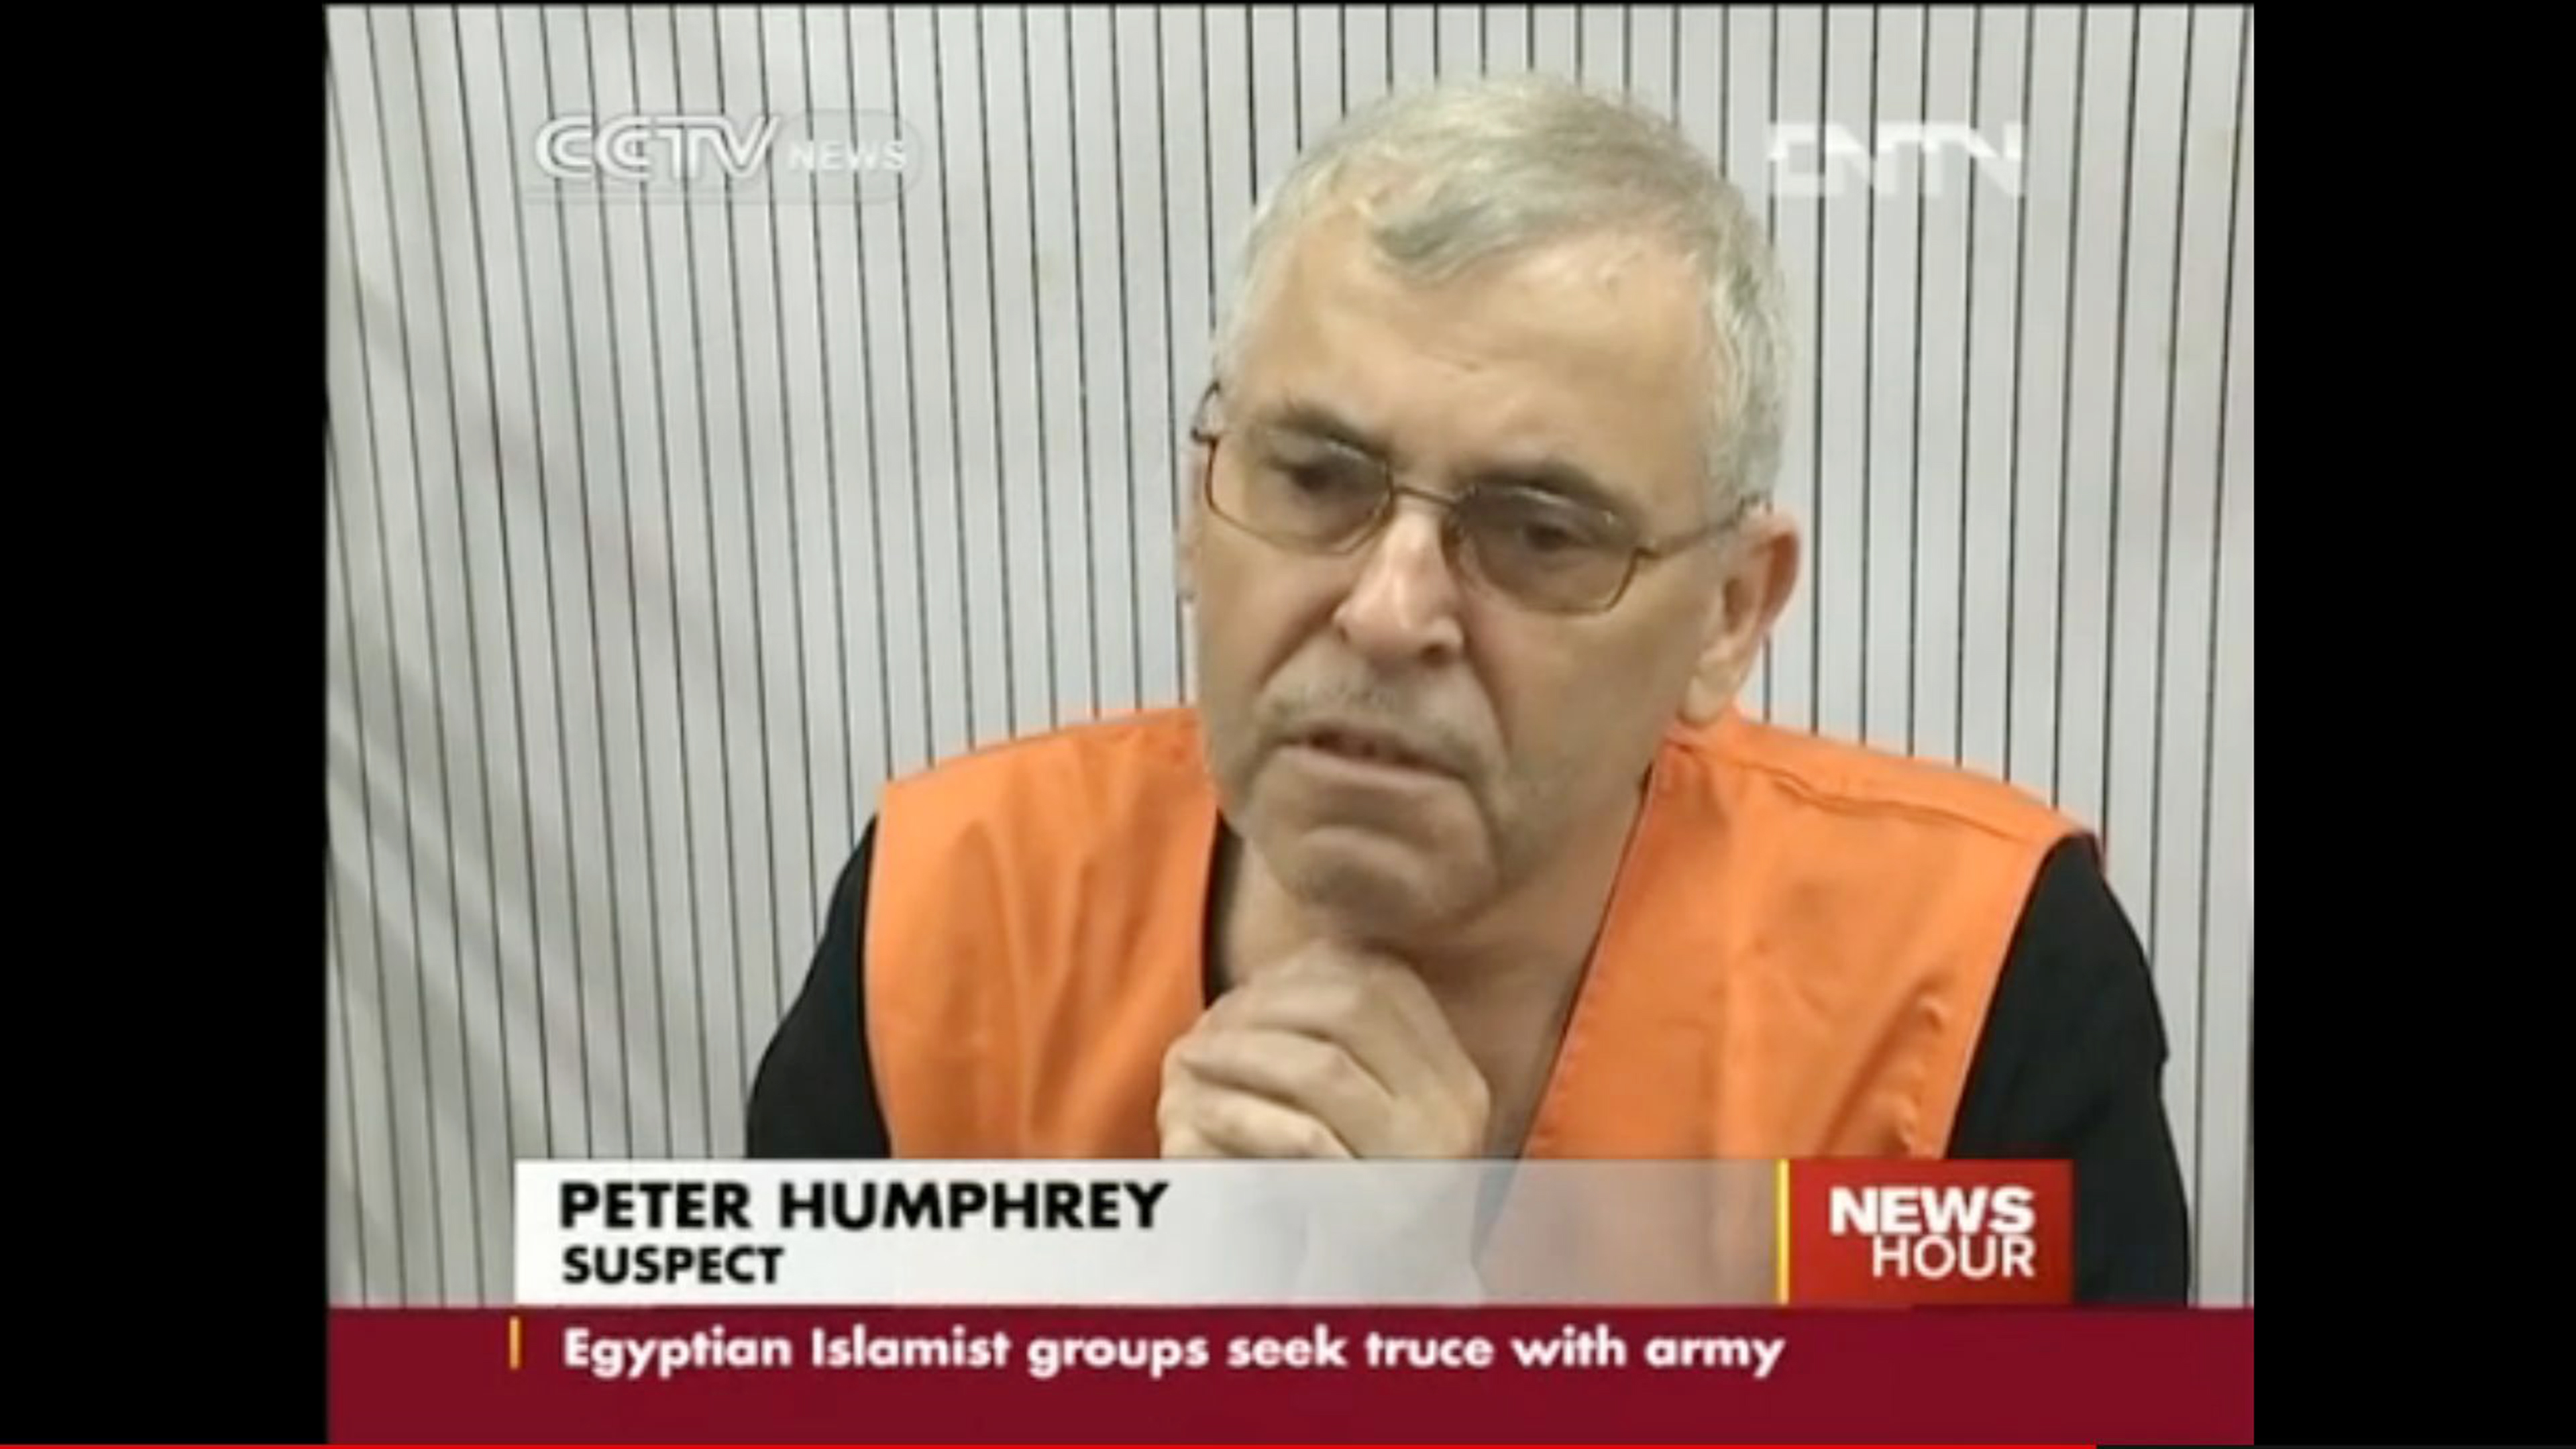 Peter Humphrey seen in his testimony aired on CCTV. Photo: Screenshot